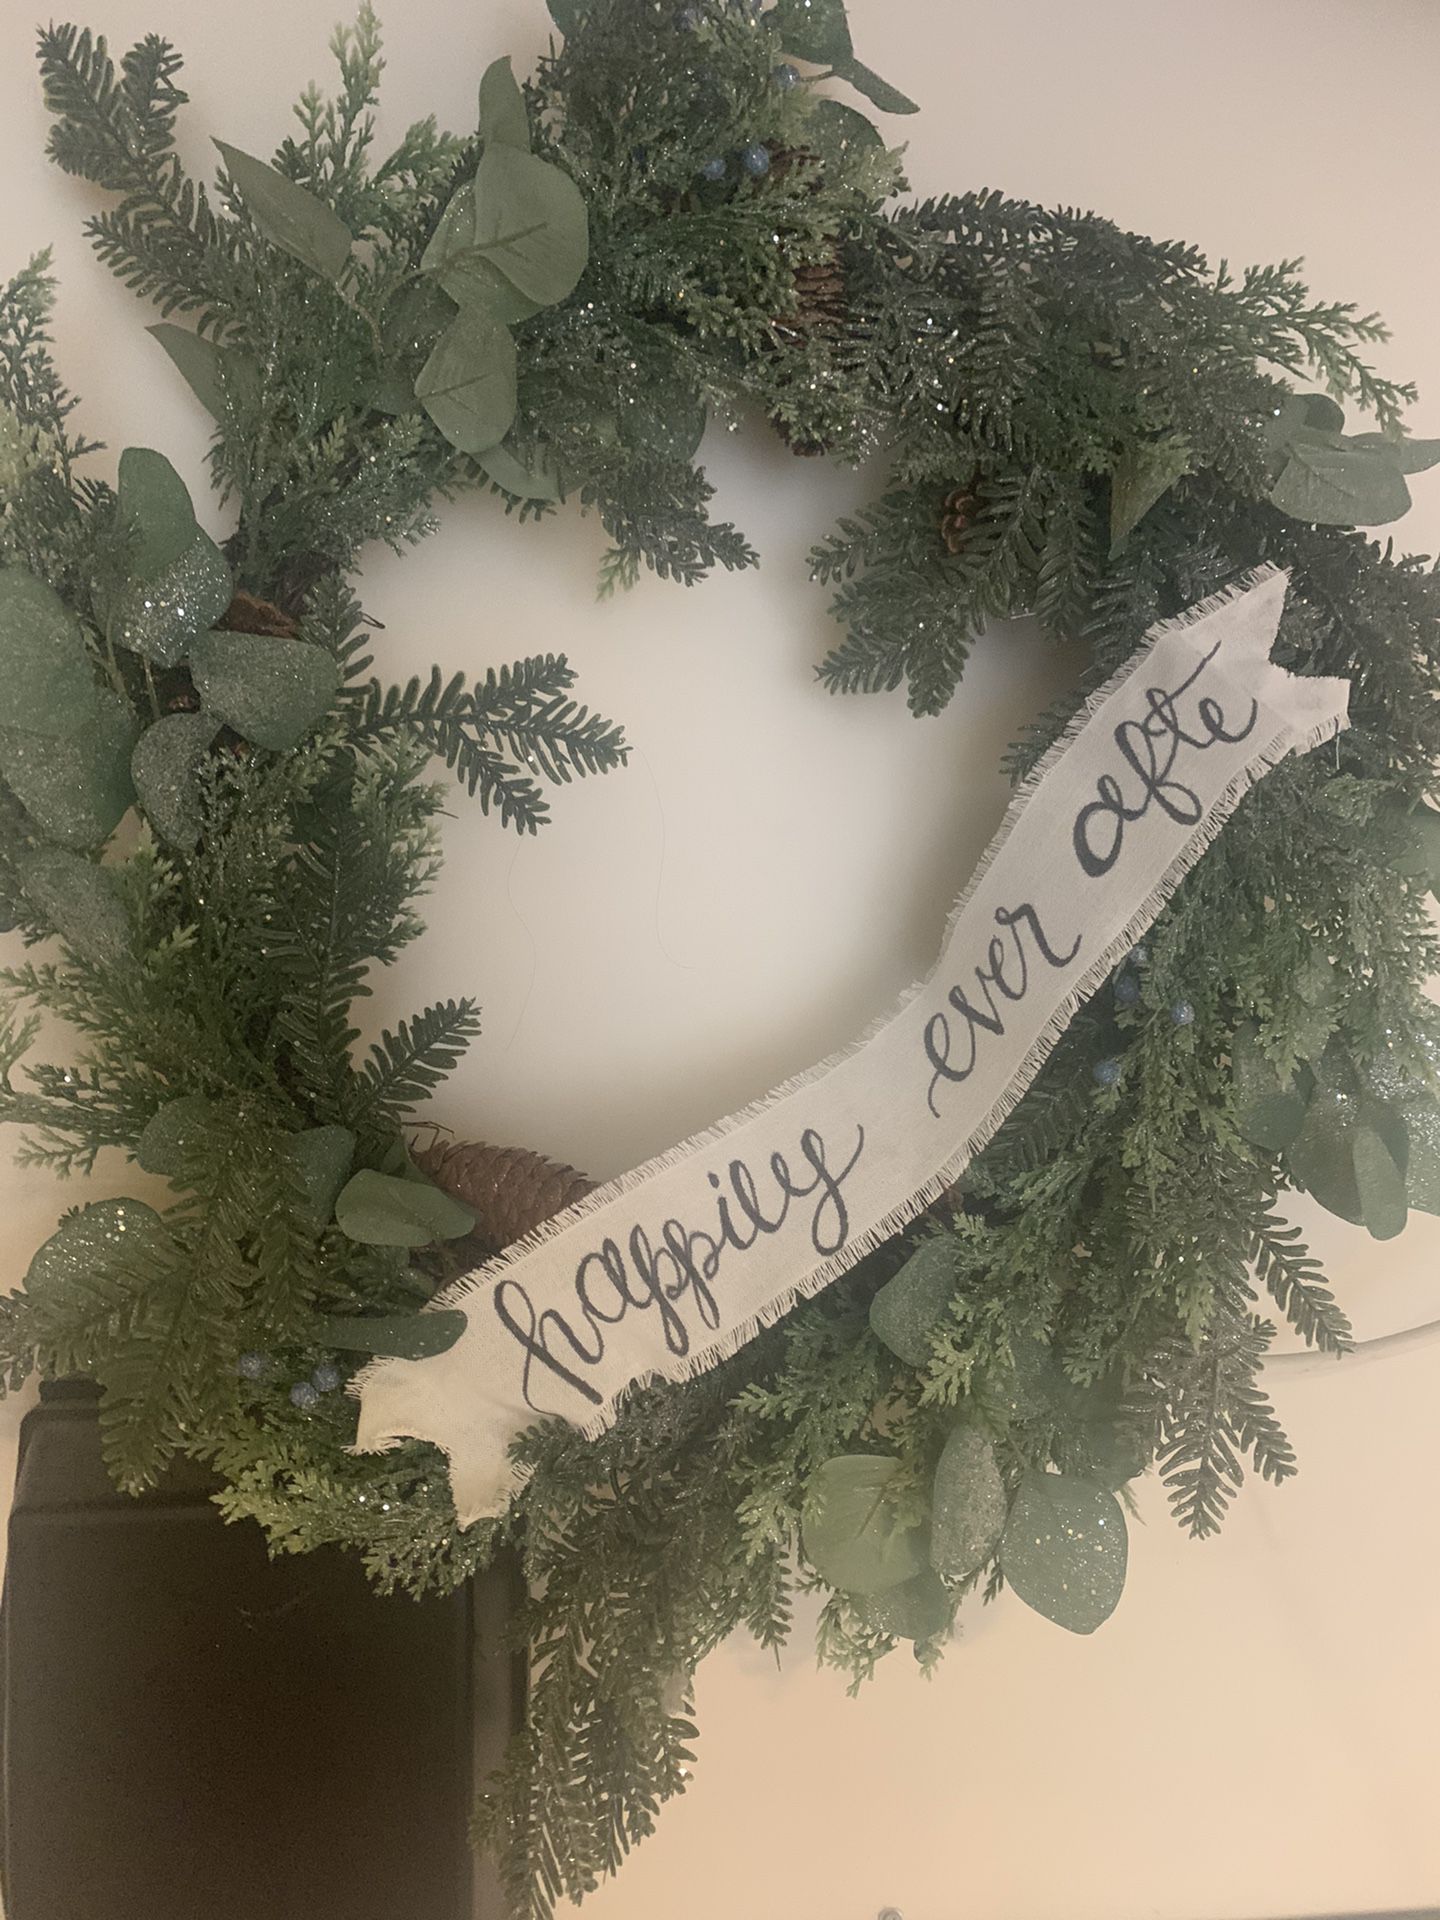 Happily ever after wreath